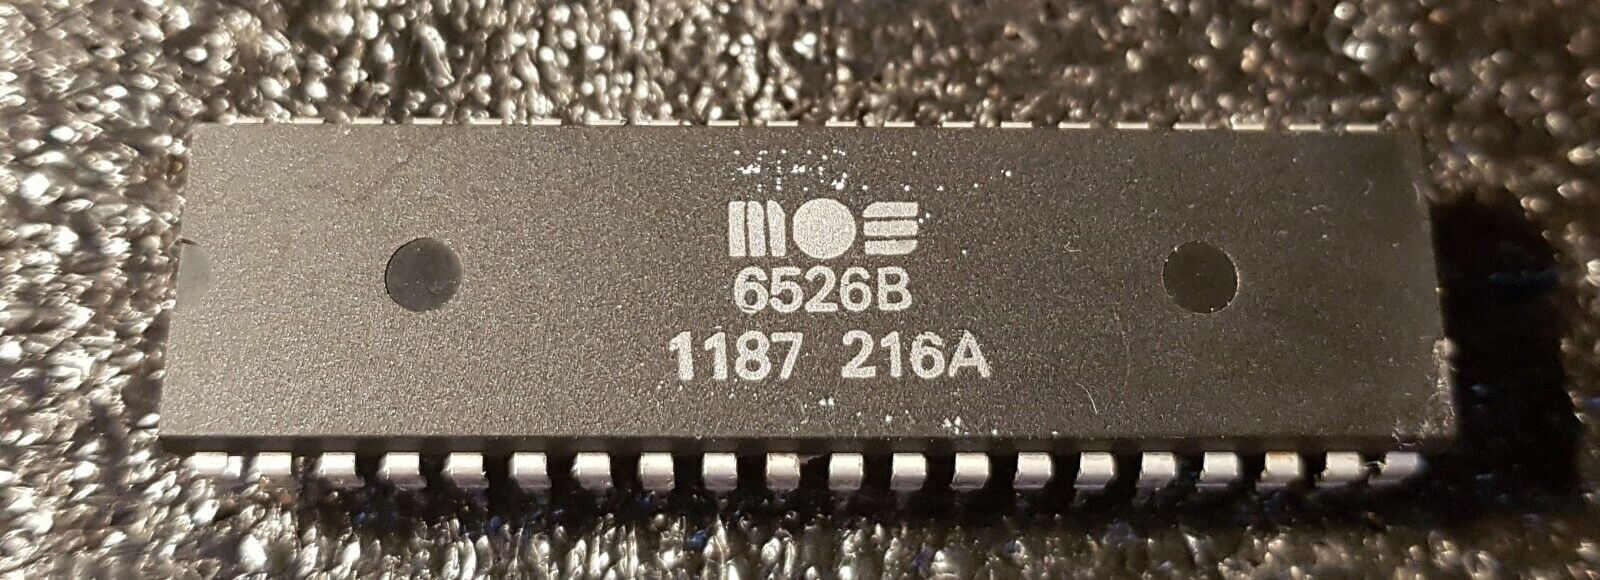 MOS 6526B CIA, Chip for Commodore 64/128/1570/1571, Genuine part working.